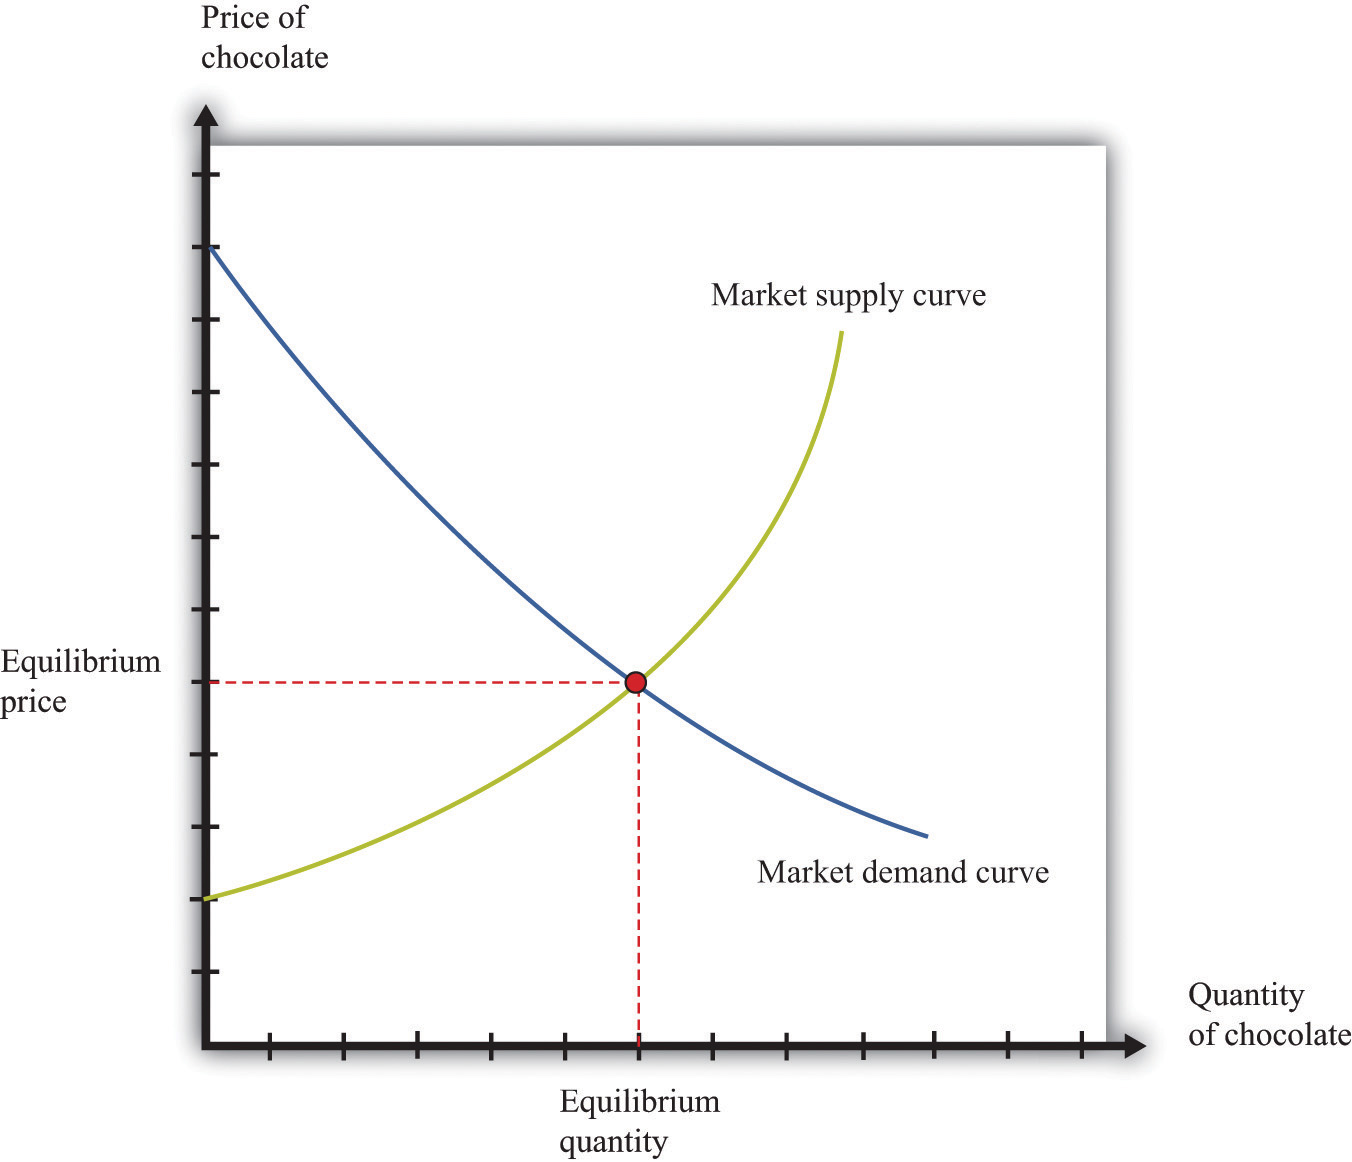 when firms exit a perfectly competitive industry, the market supply curve shifts to the left. true